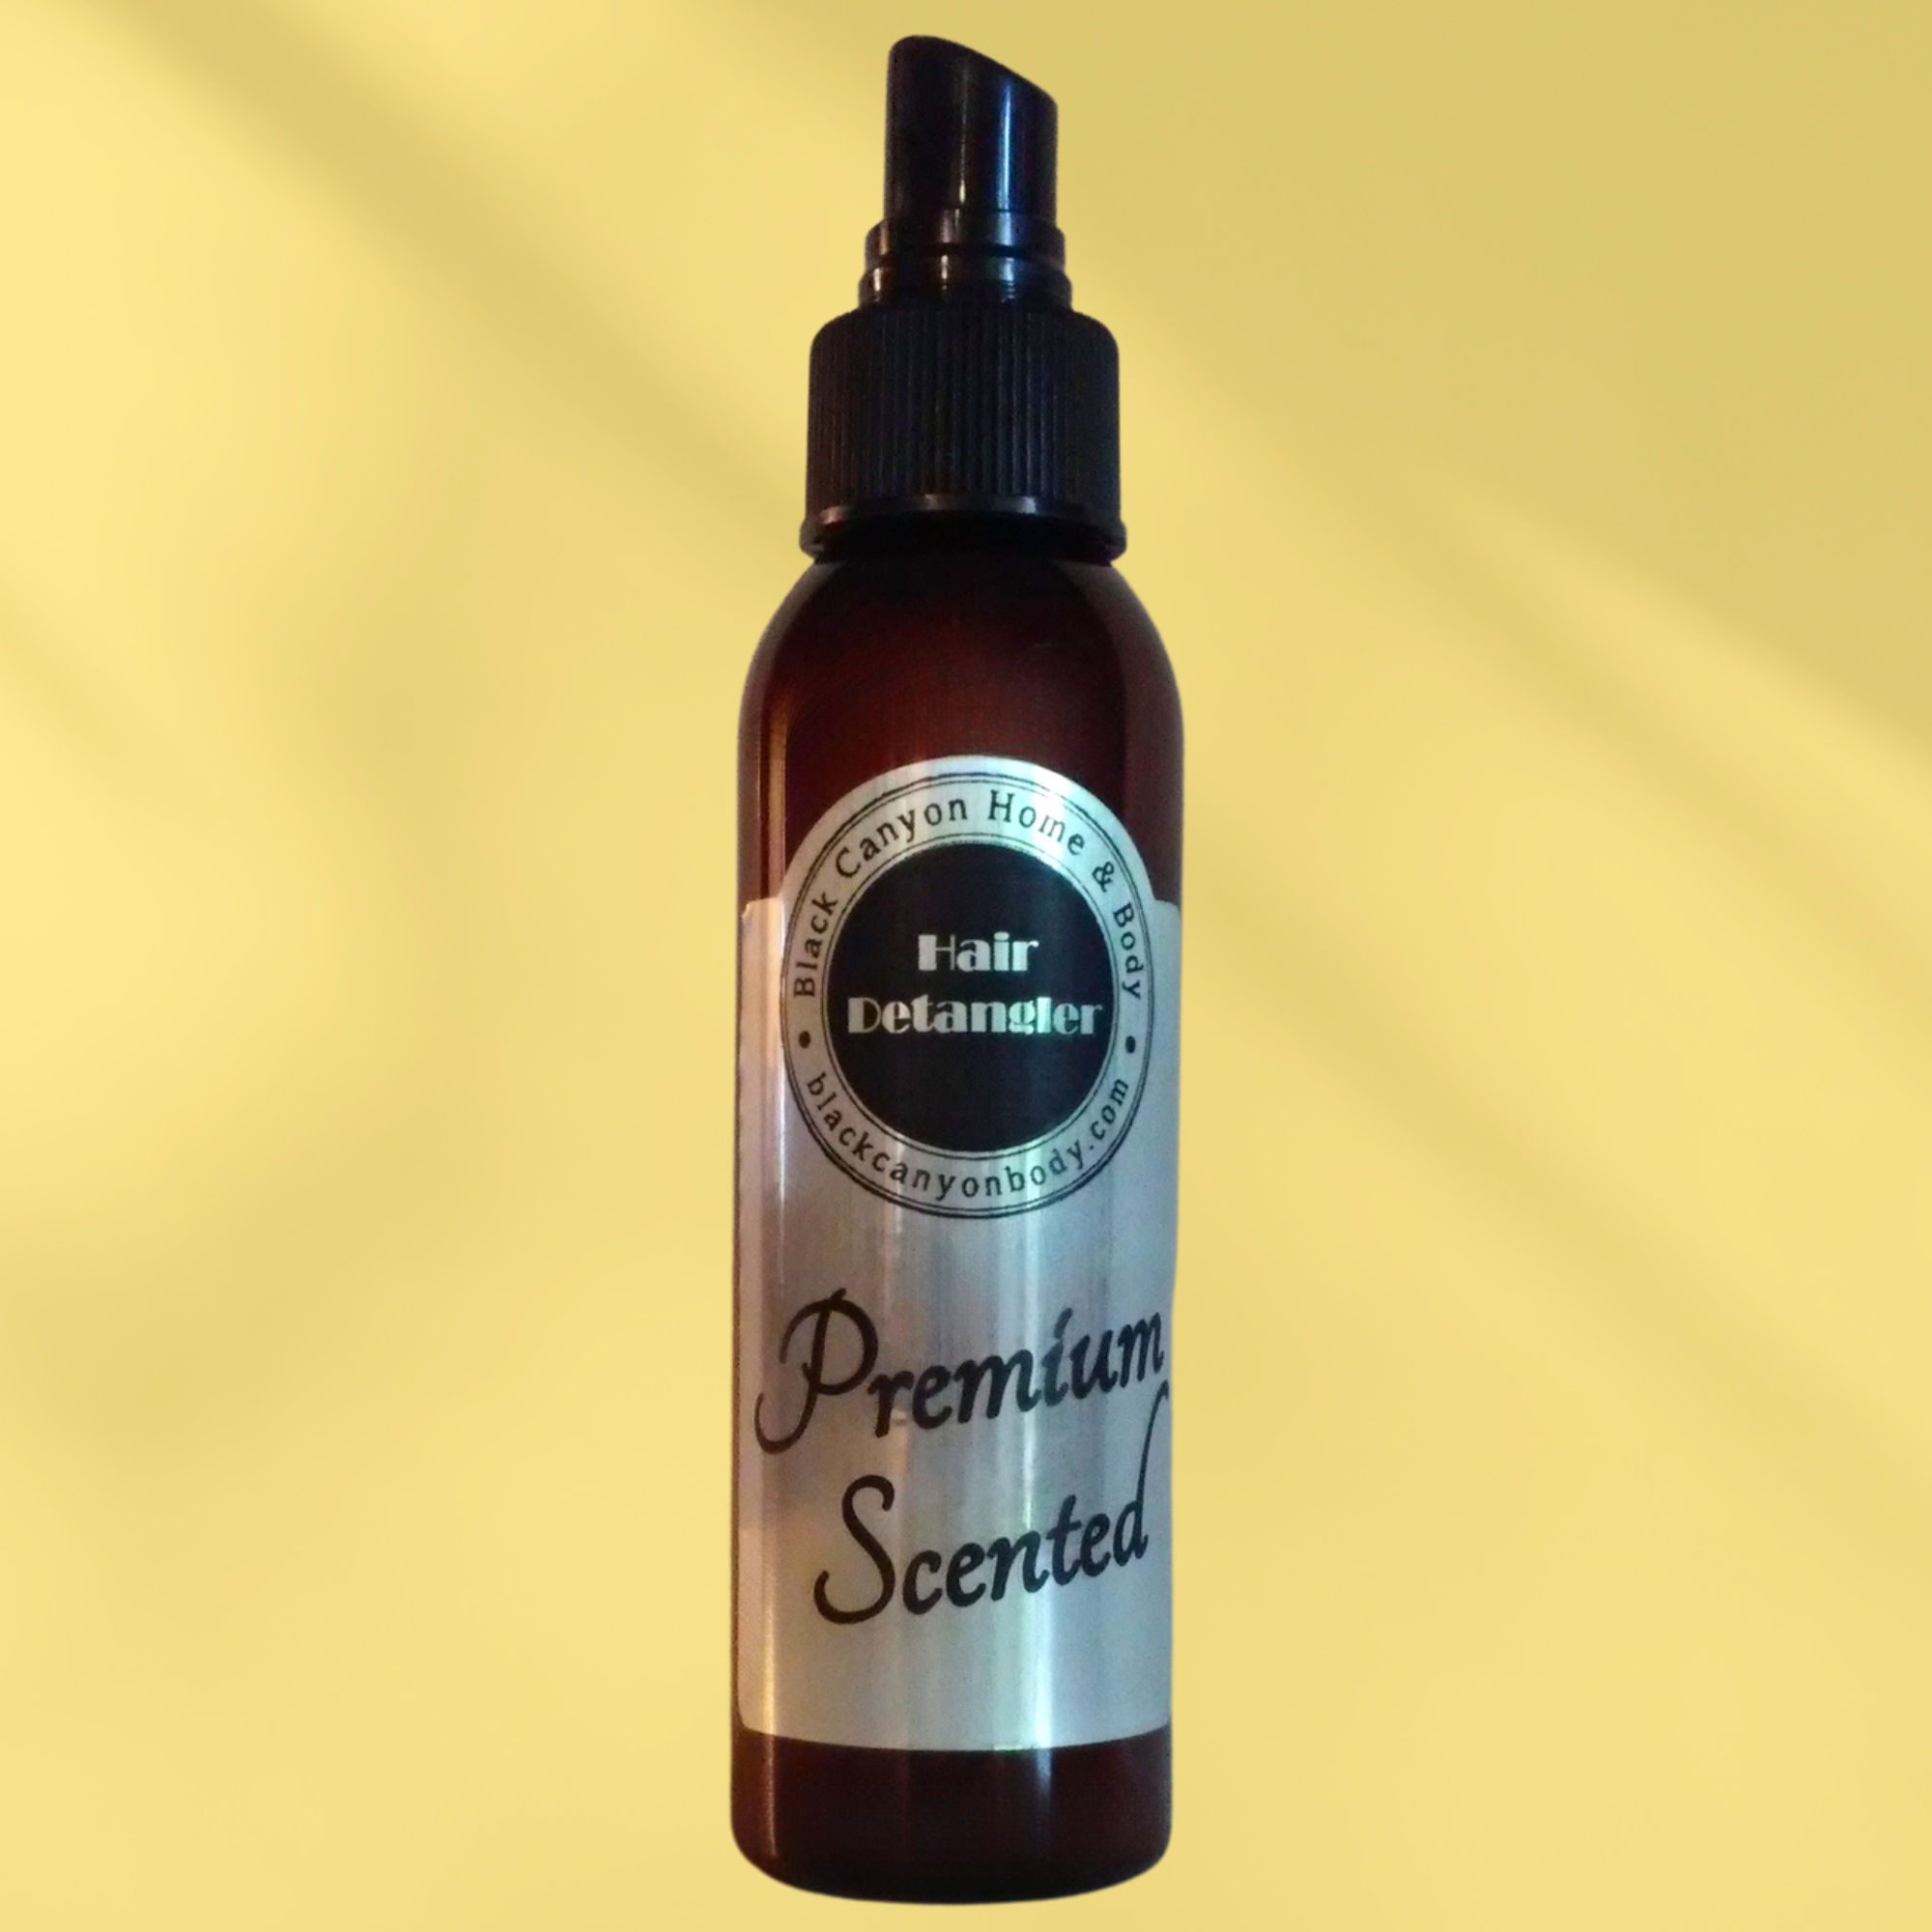 Black Canyon Apothecary Orange Scented Hair Detangler Spray with Olive Oil